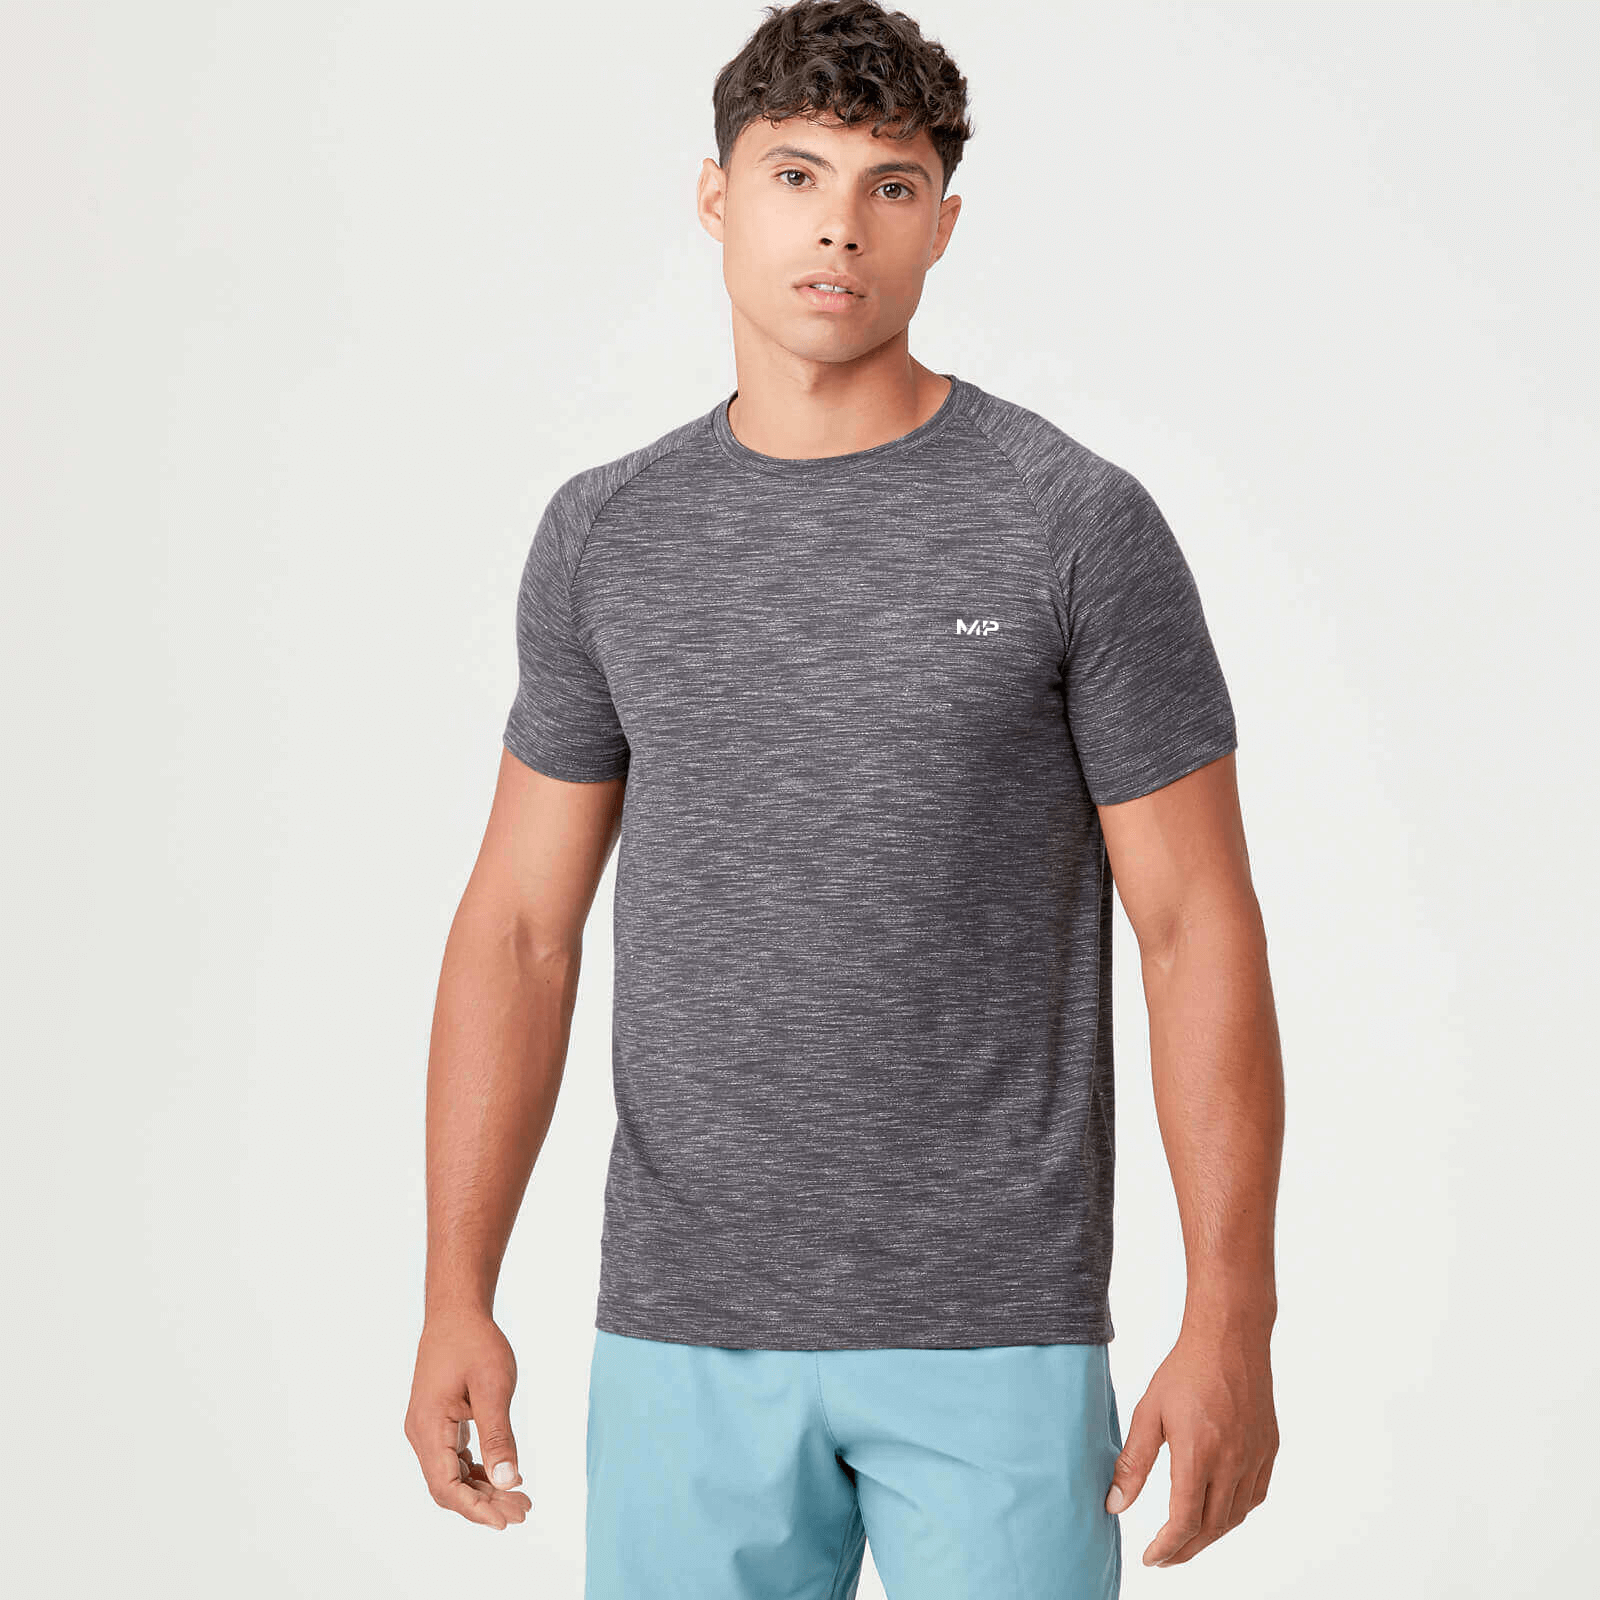 Buy MP Men's Performance T-Shirt - Charcoal Marl in Guam - find